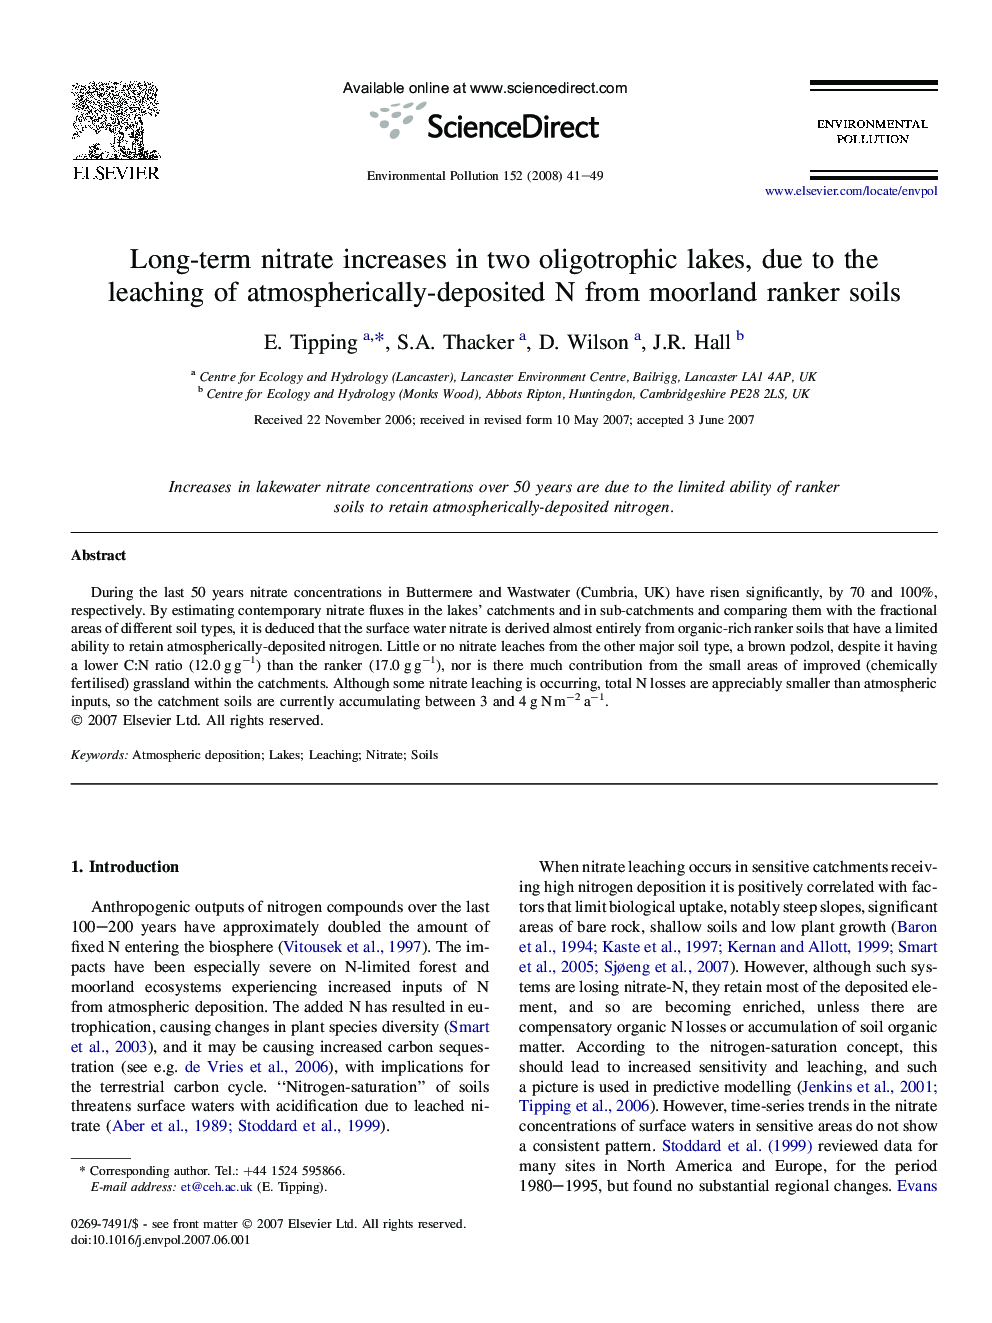 Long-term nitrate increases in two oligotrophic lakes, due to the leaching of atmospherically-deposited N from moorland ranker soils